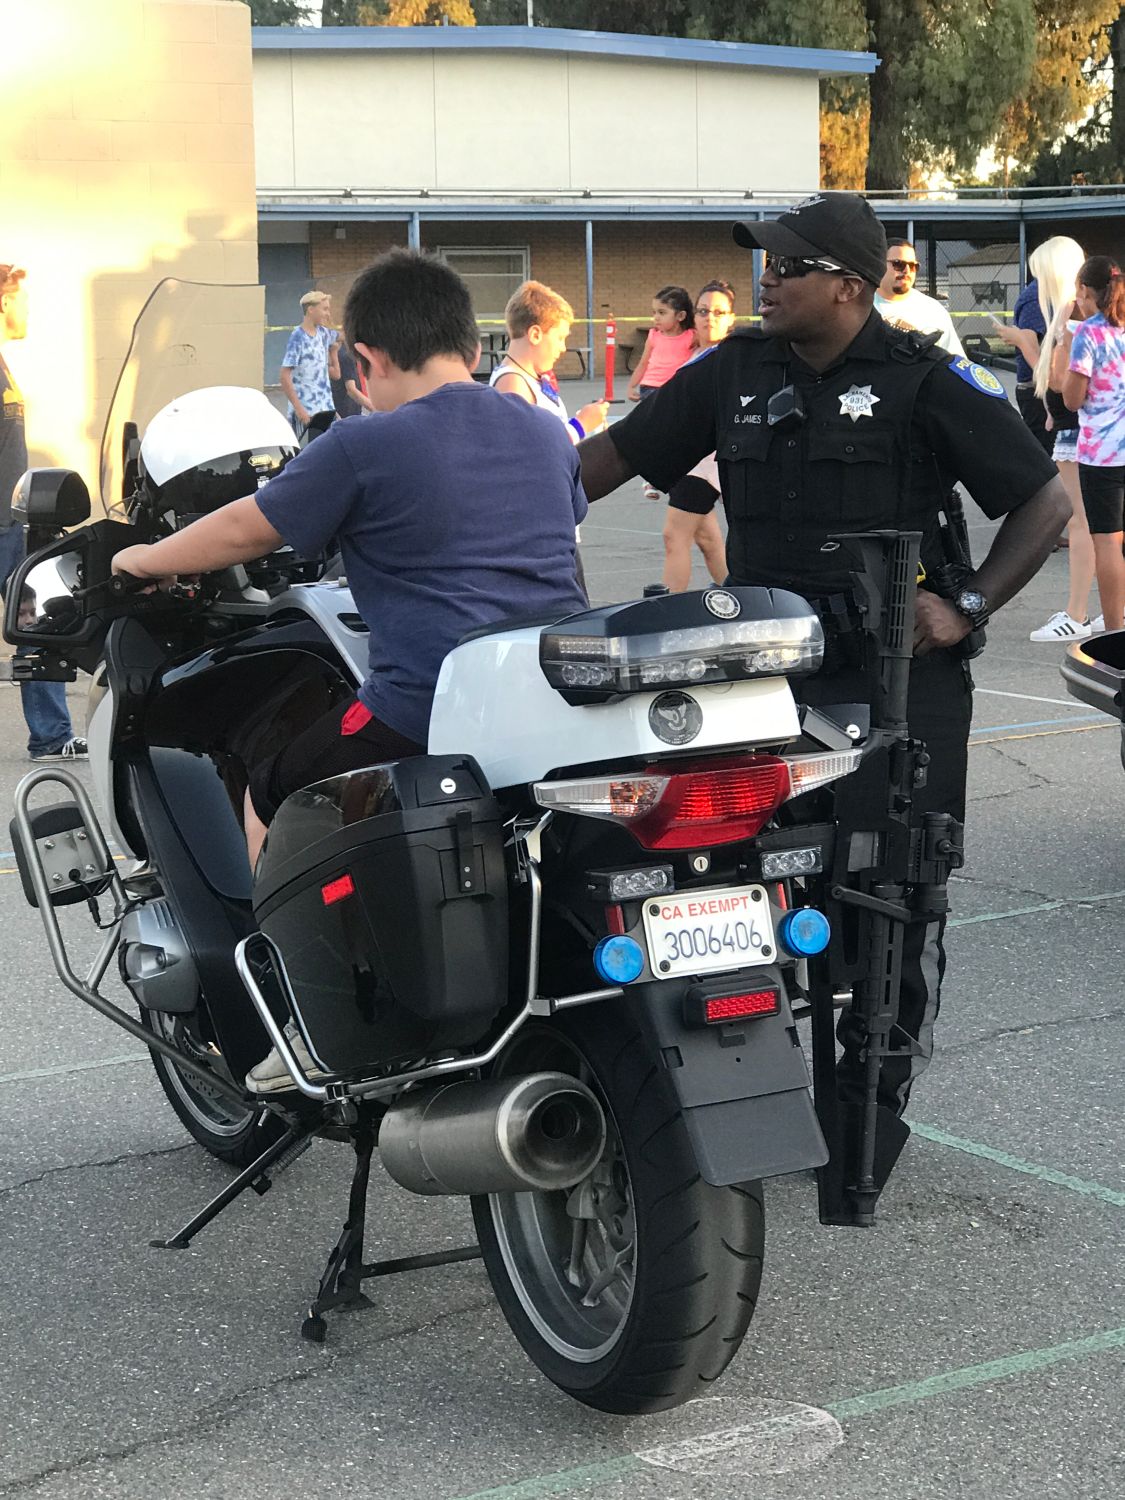 A photo of a traffic officer letting a child sit on his parked police motorcycle at a school event.